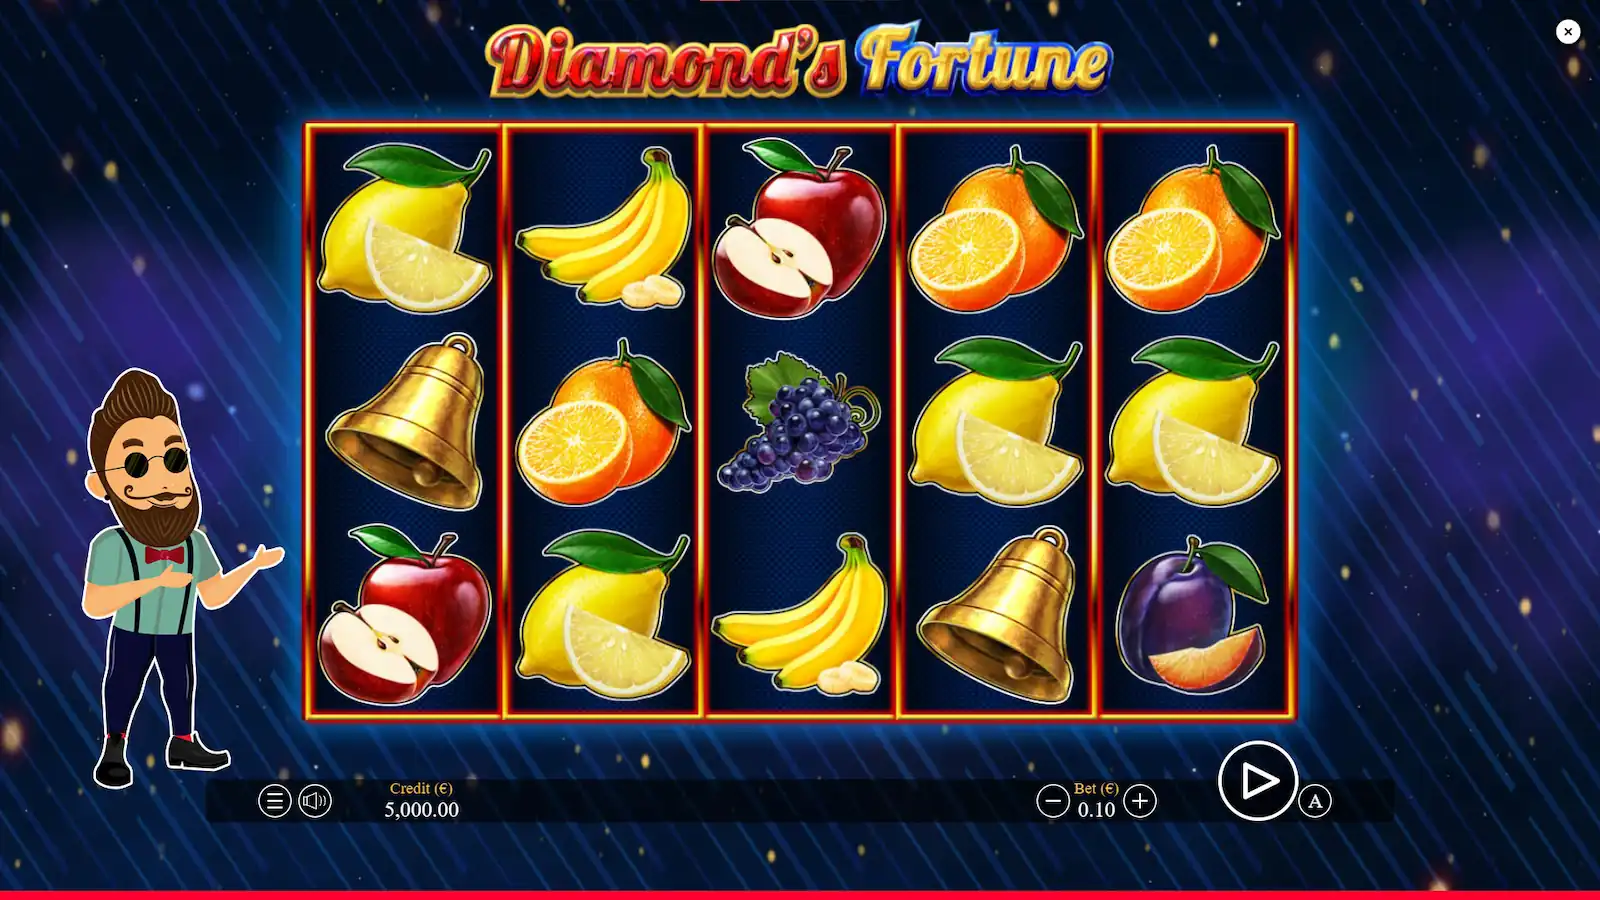 Diamond’s Fortune Review